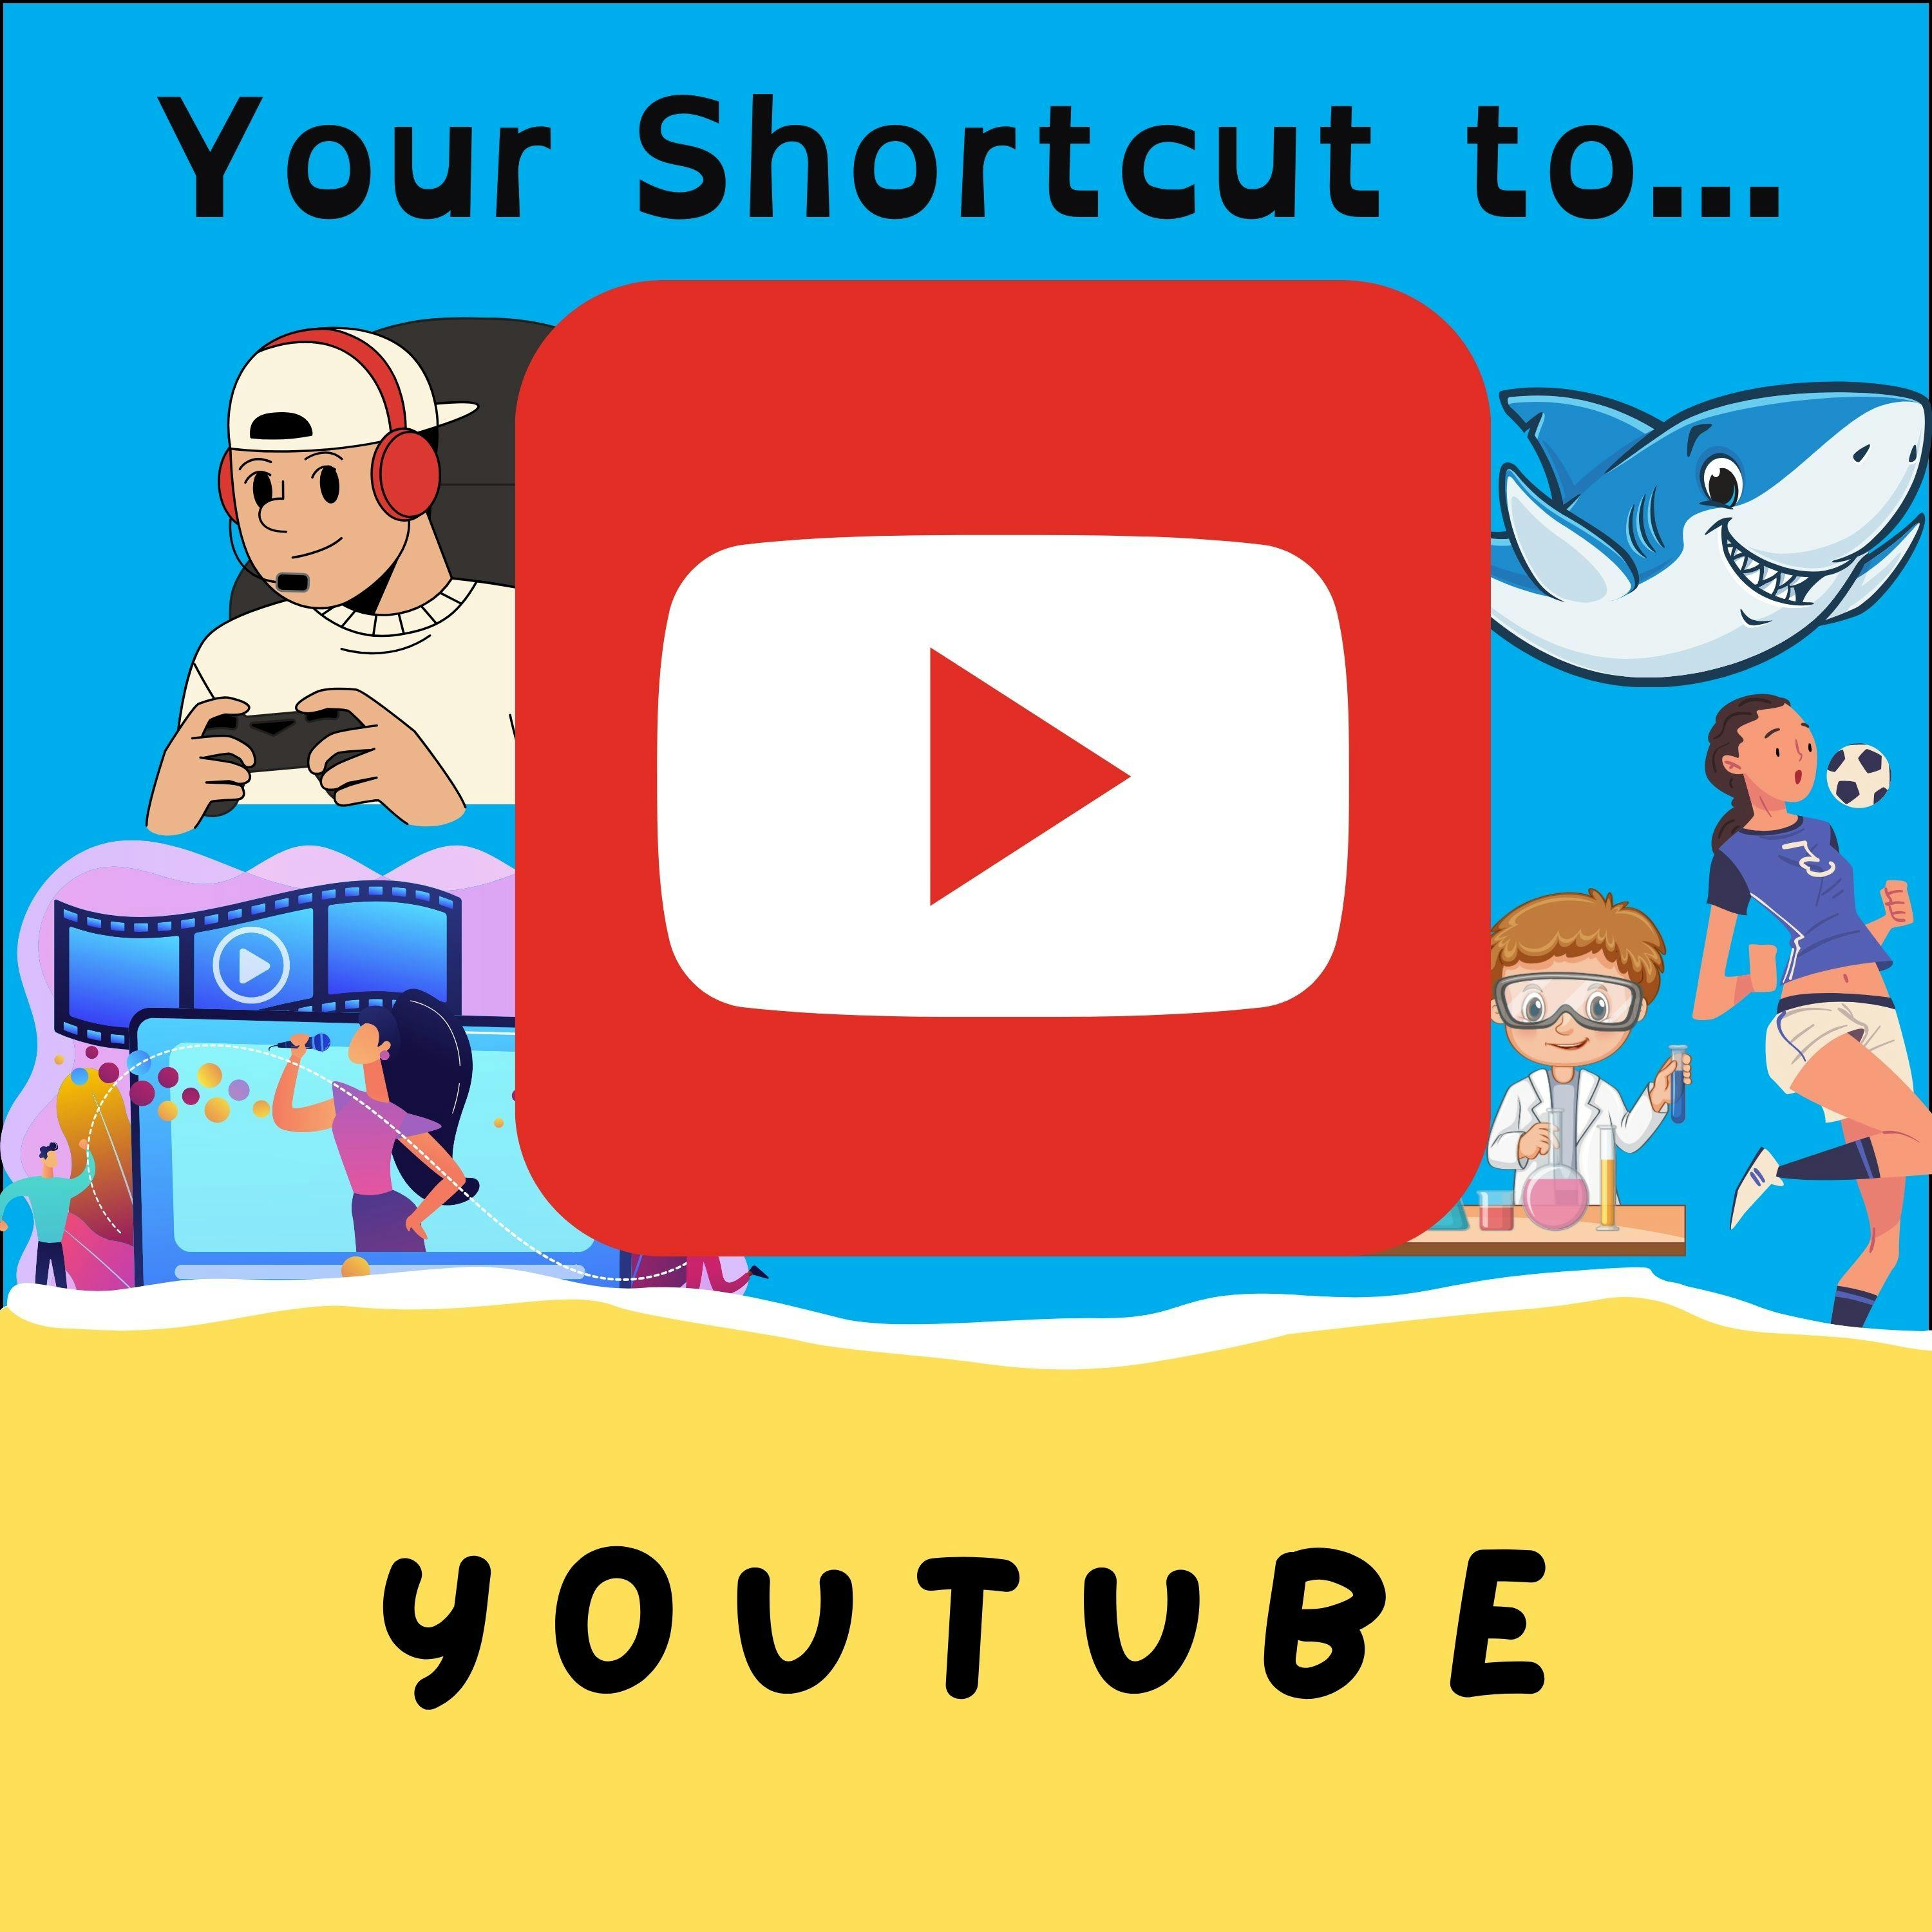 Your Shortcut to... YouTube